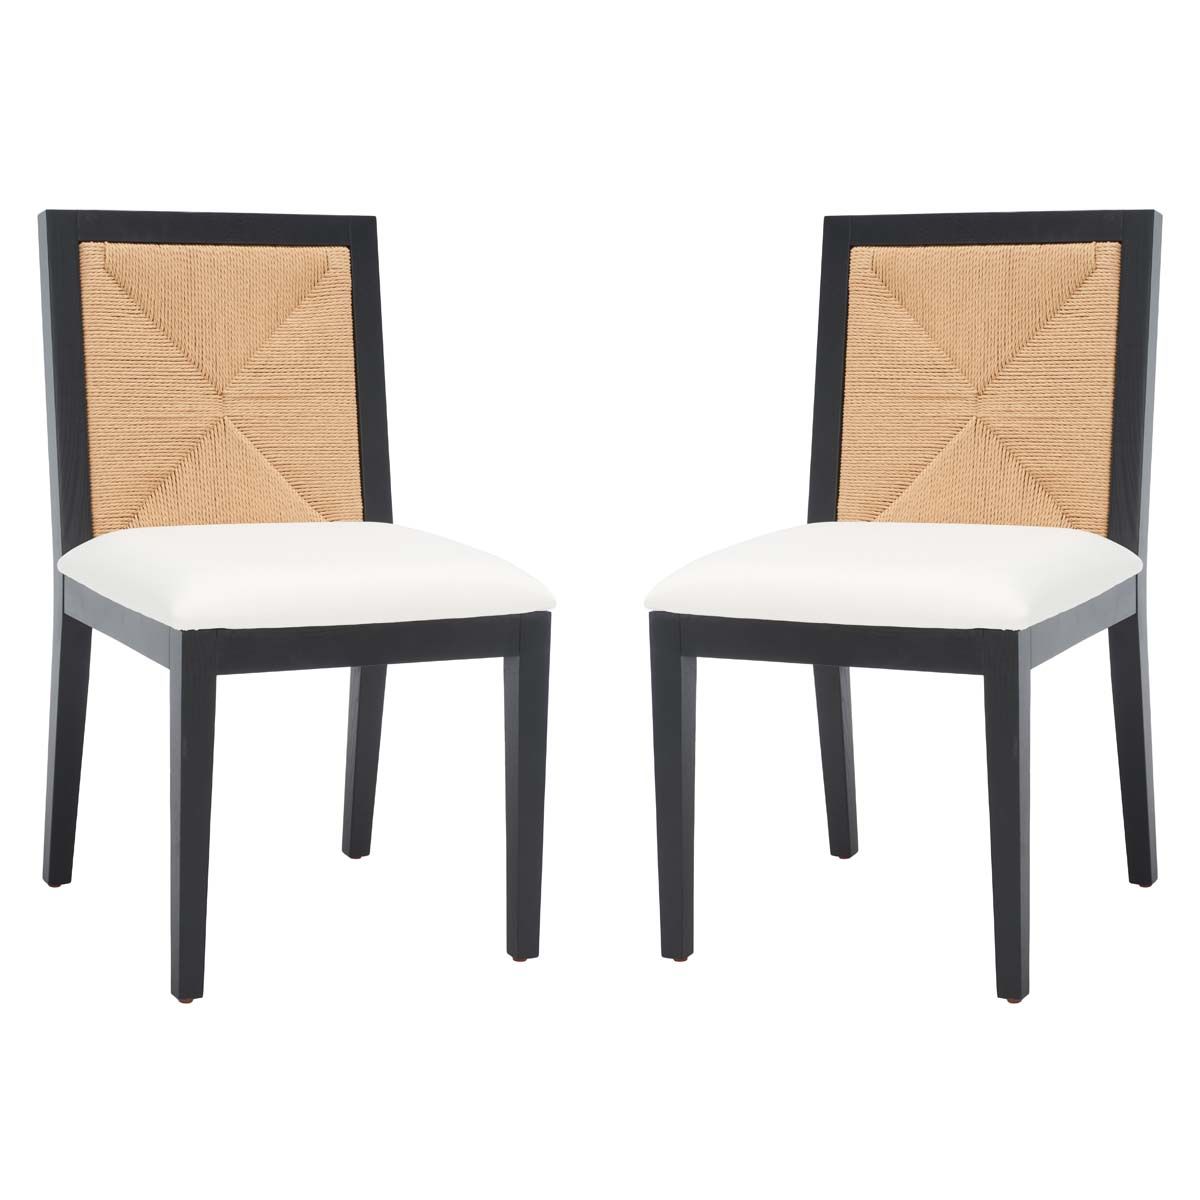 Safavieh Couture Emilio Woven Dining Chair - Black / Natural